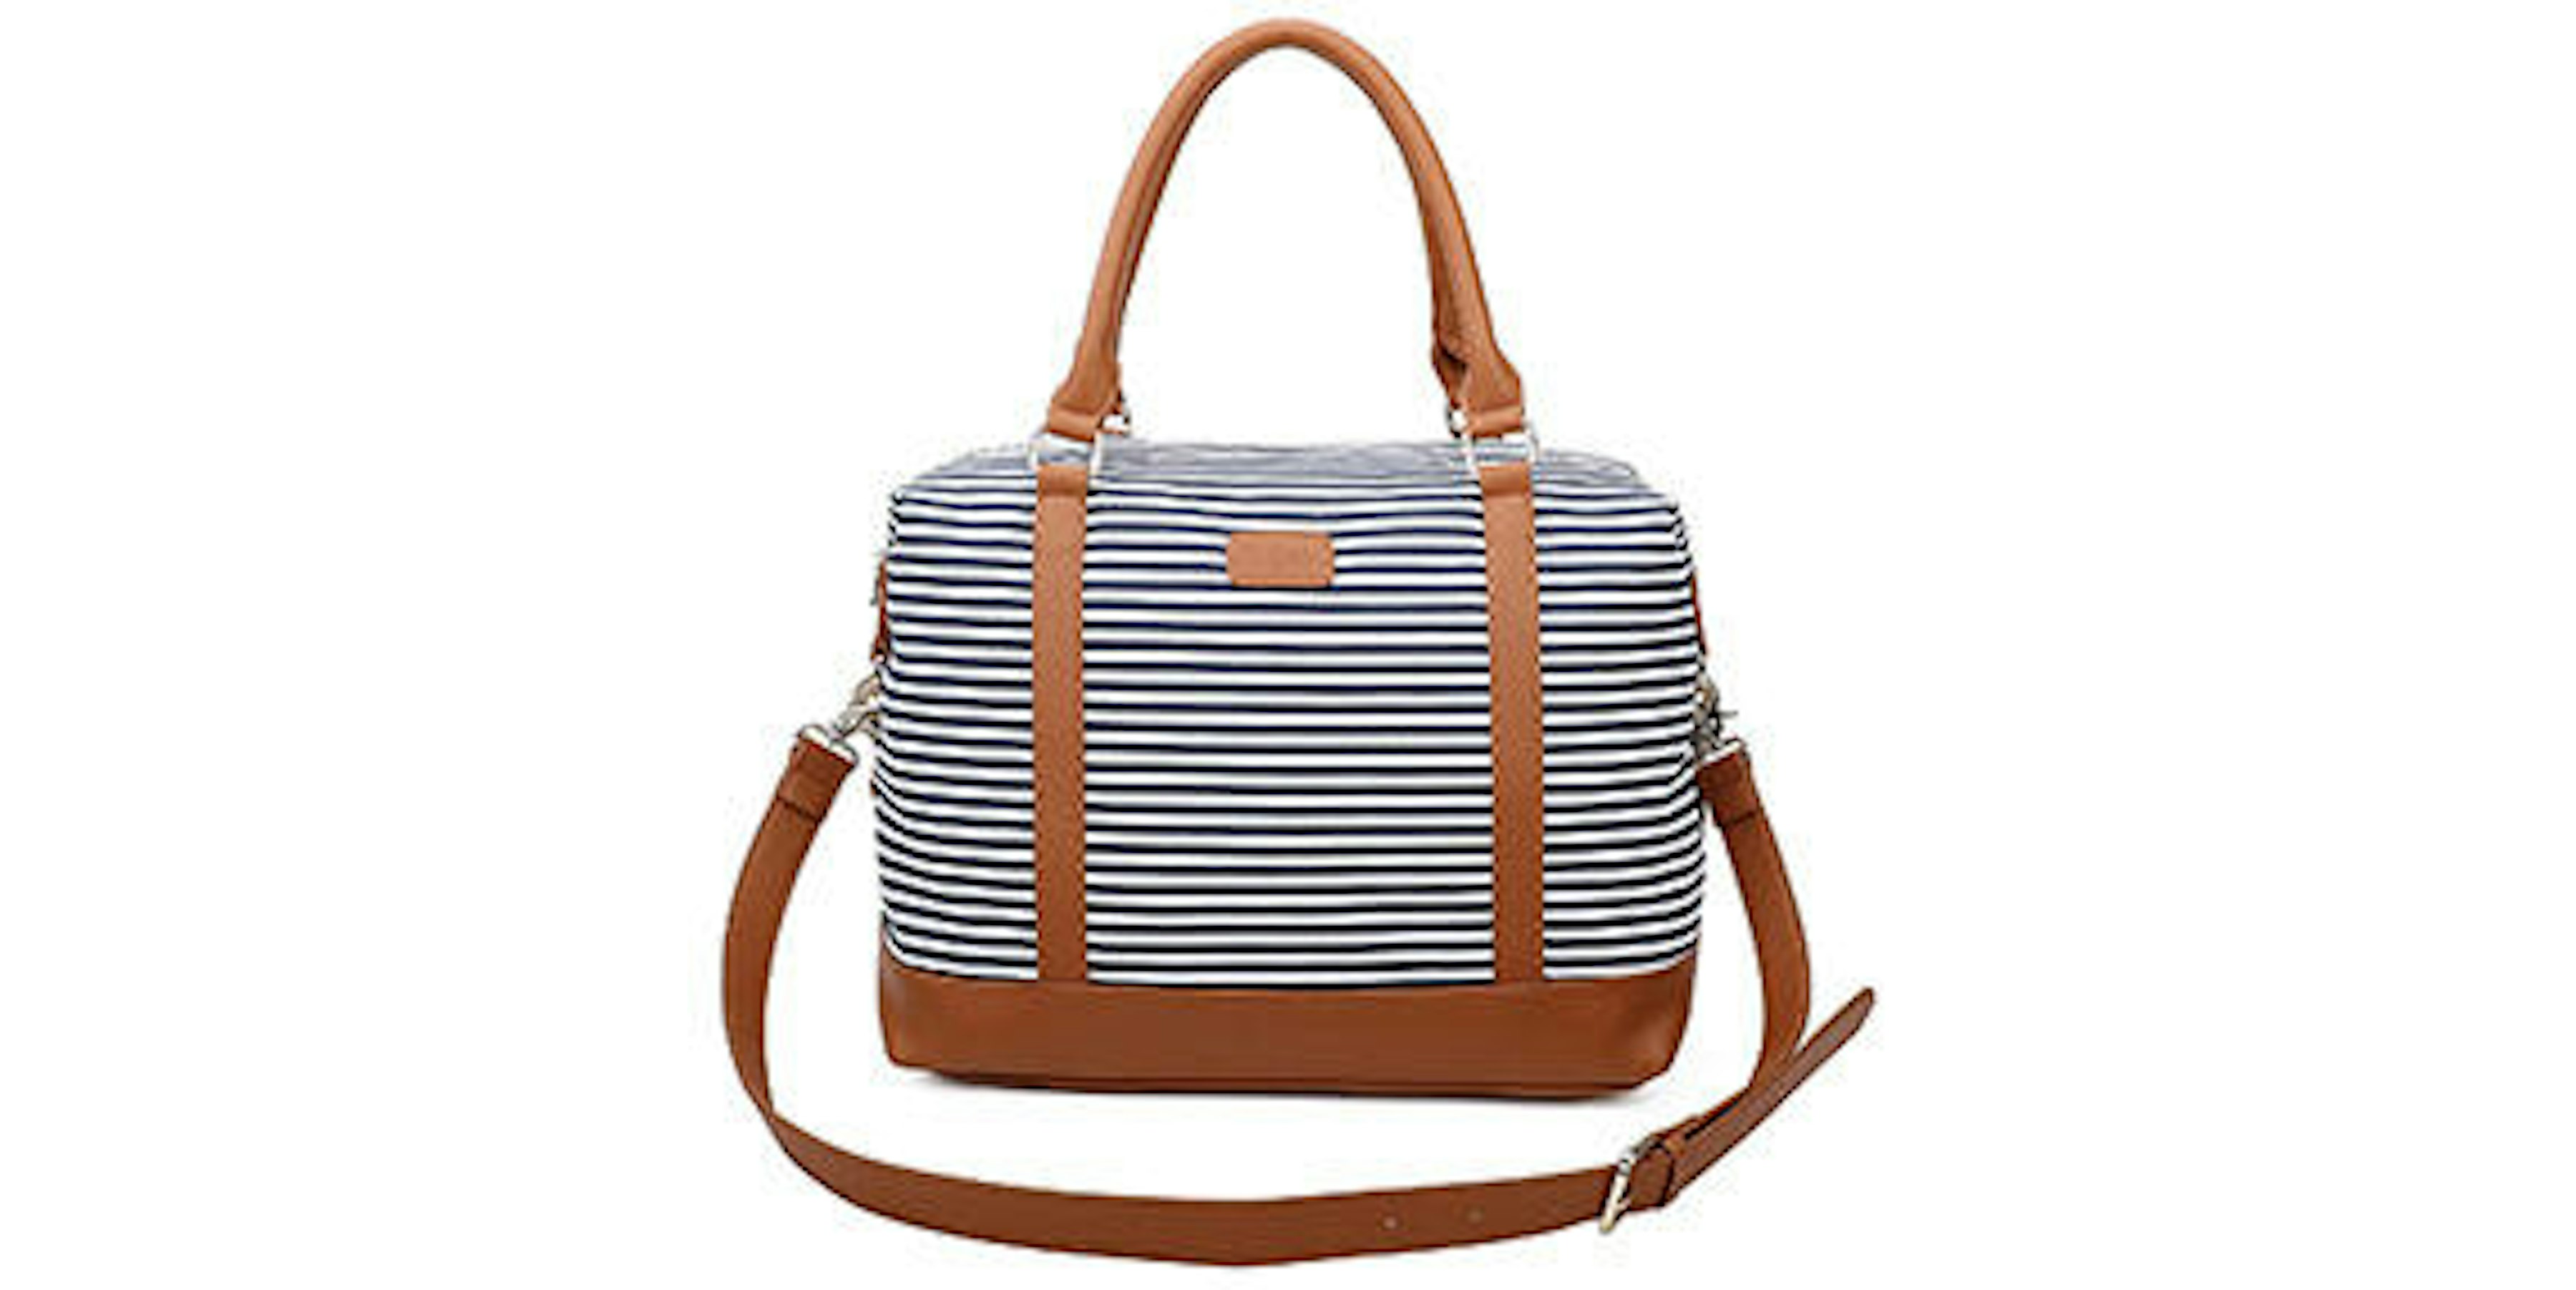 Best Nautical Beach Bags and Totes for a Cruise to the Beach